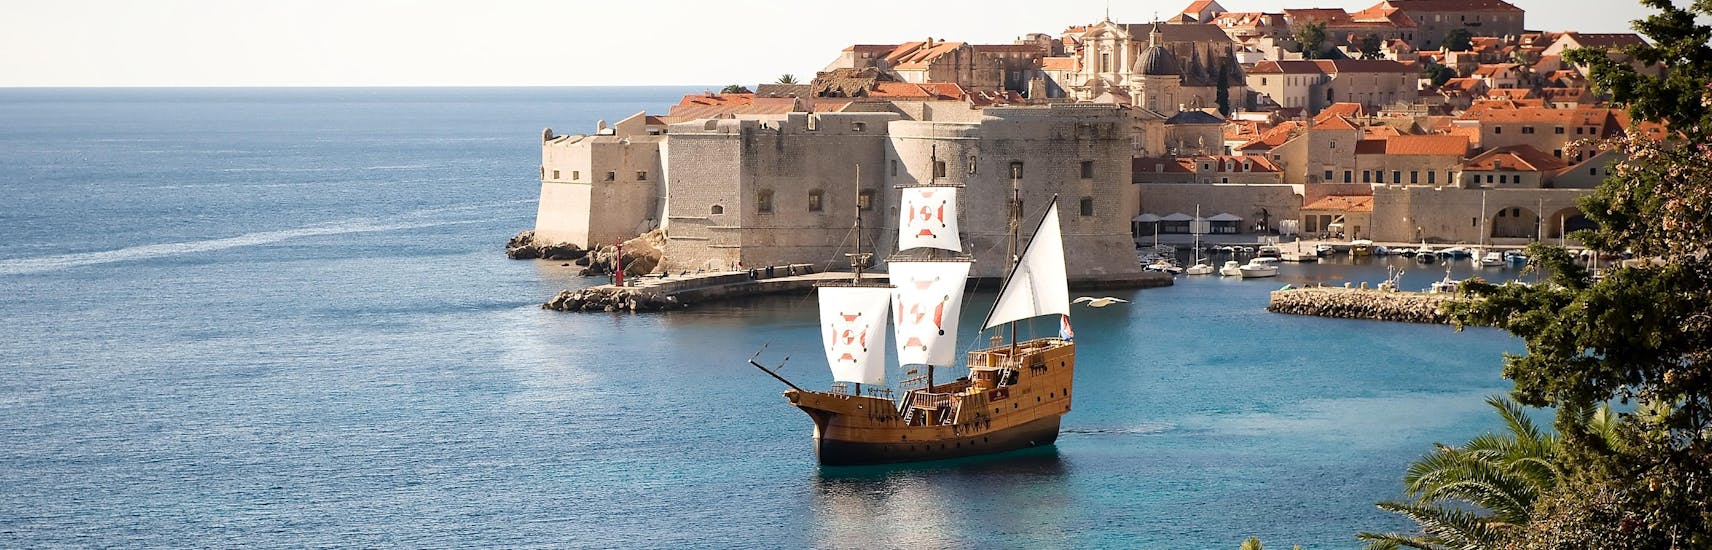 Picture of the traditional Karaka ship used by Karaka Dubrovnik for the boat trips.